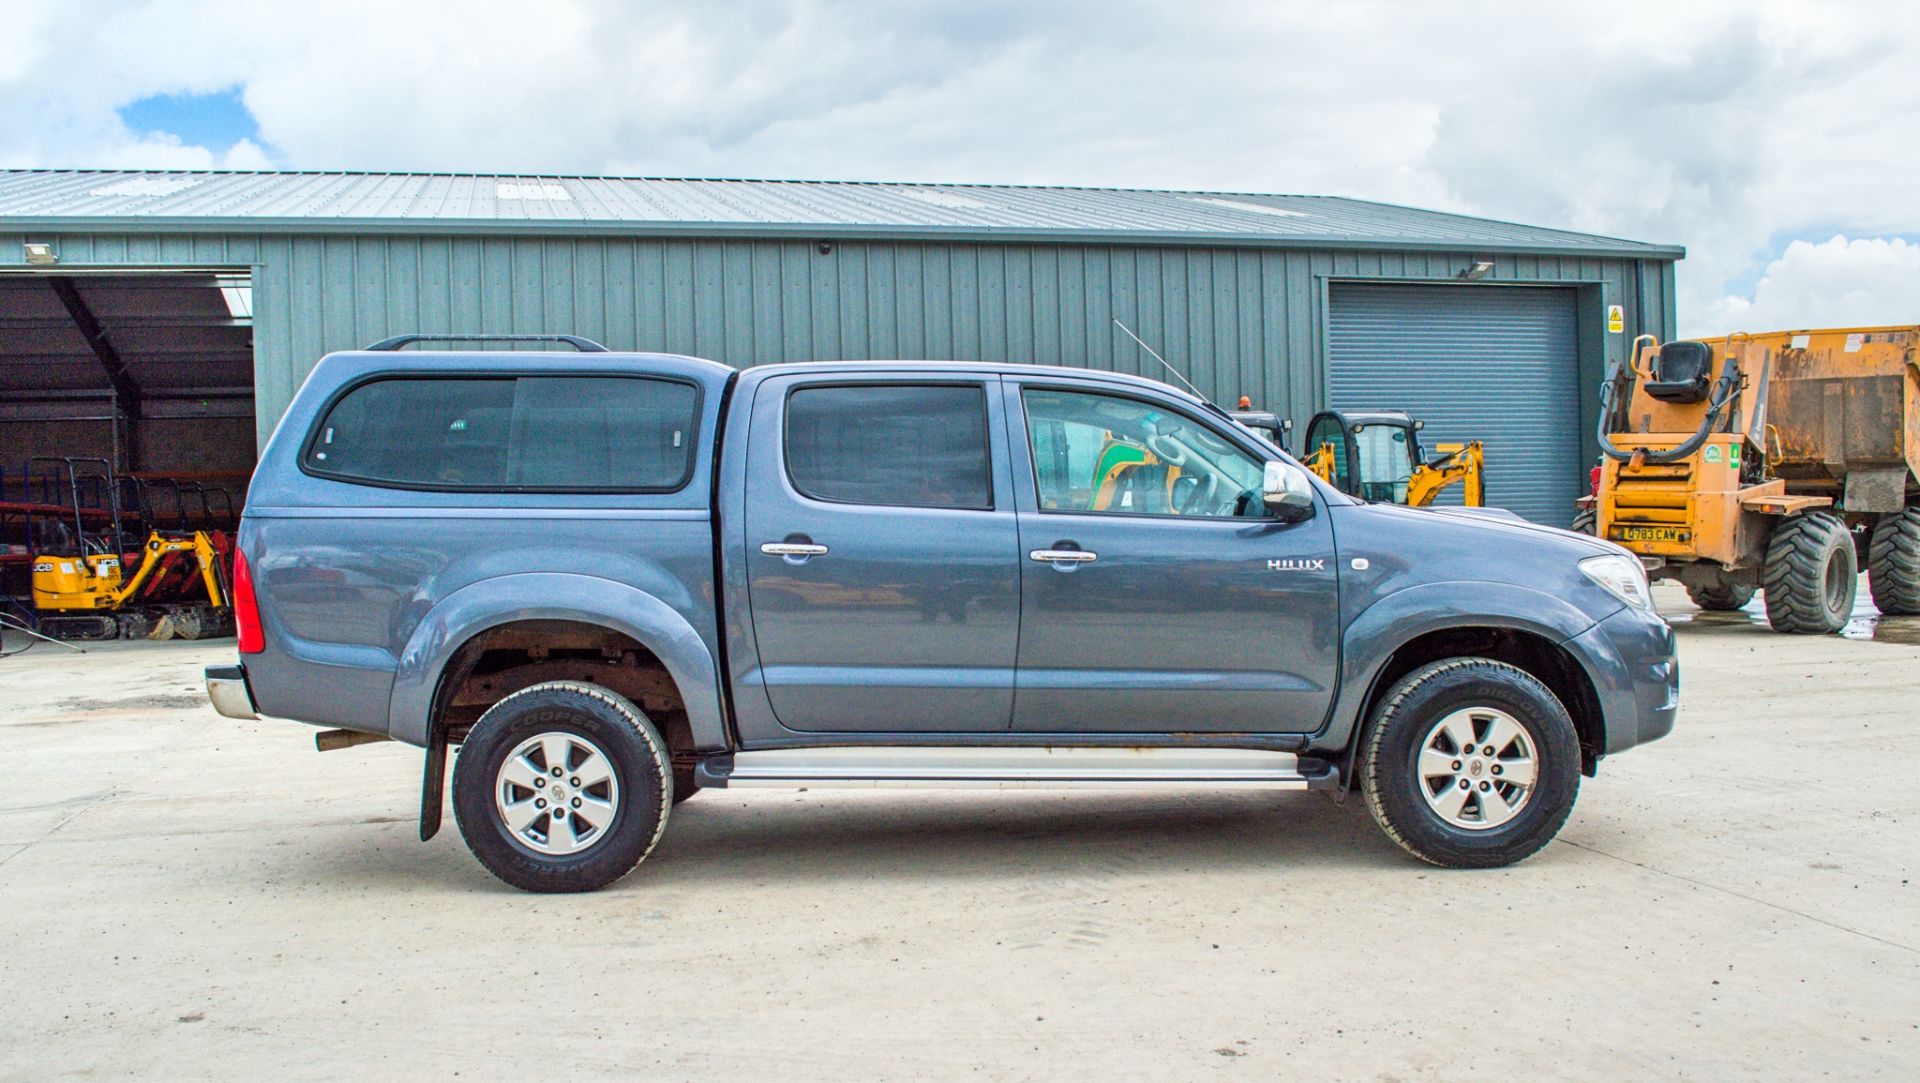 Toyota Hilux 2.5 D-4D 144 HL3 4wd manual double cab pick up Reg No: ST10 AOW Date of Registration: - Image 8 of 25